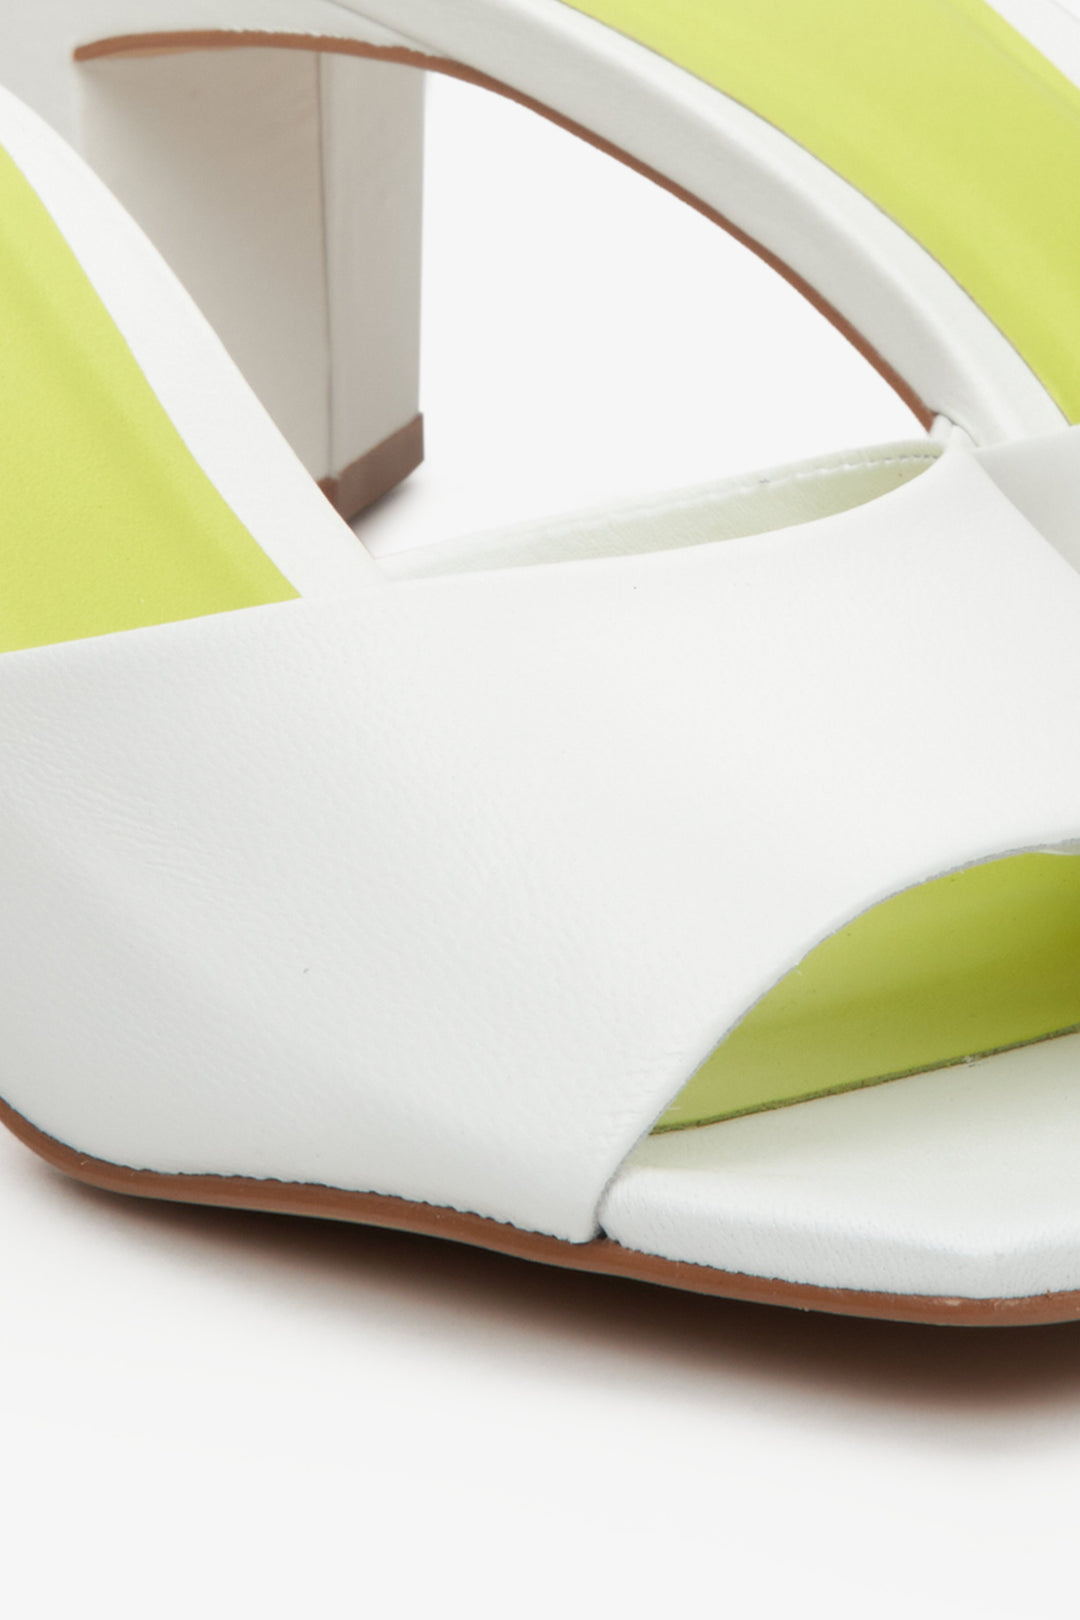 Women's white leather  mules with a sturdy block heel by Estro - close-up on details.